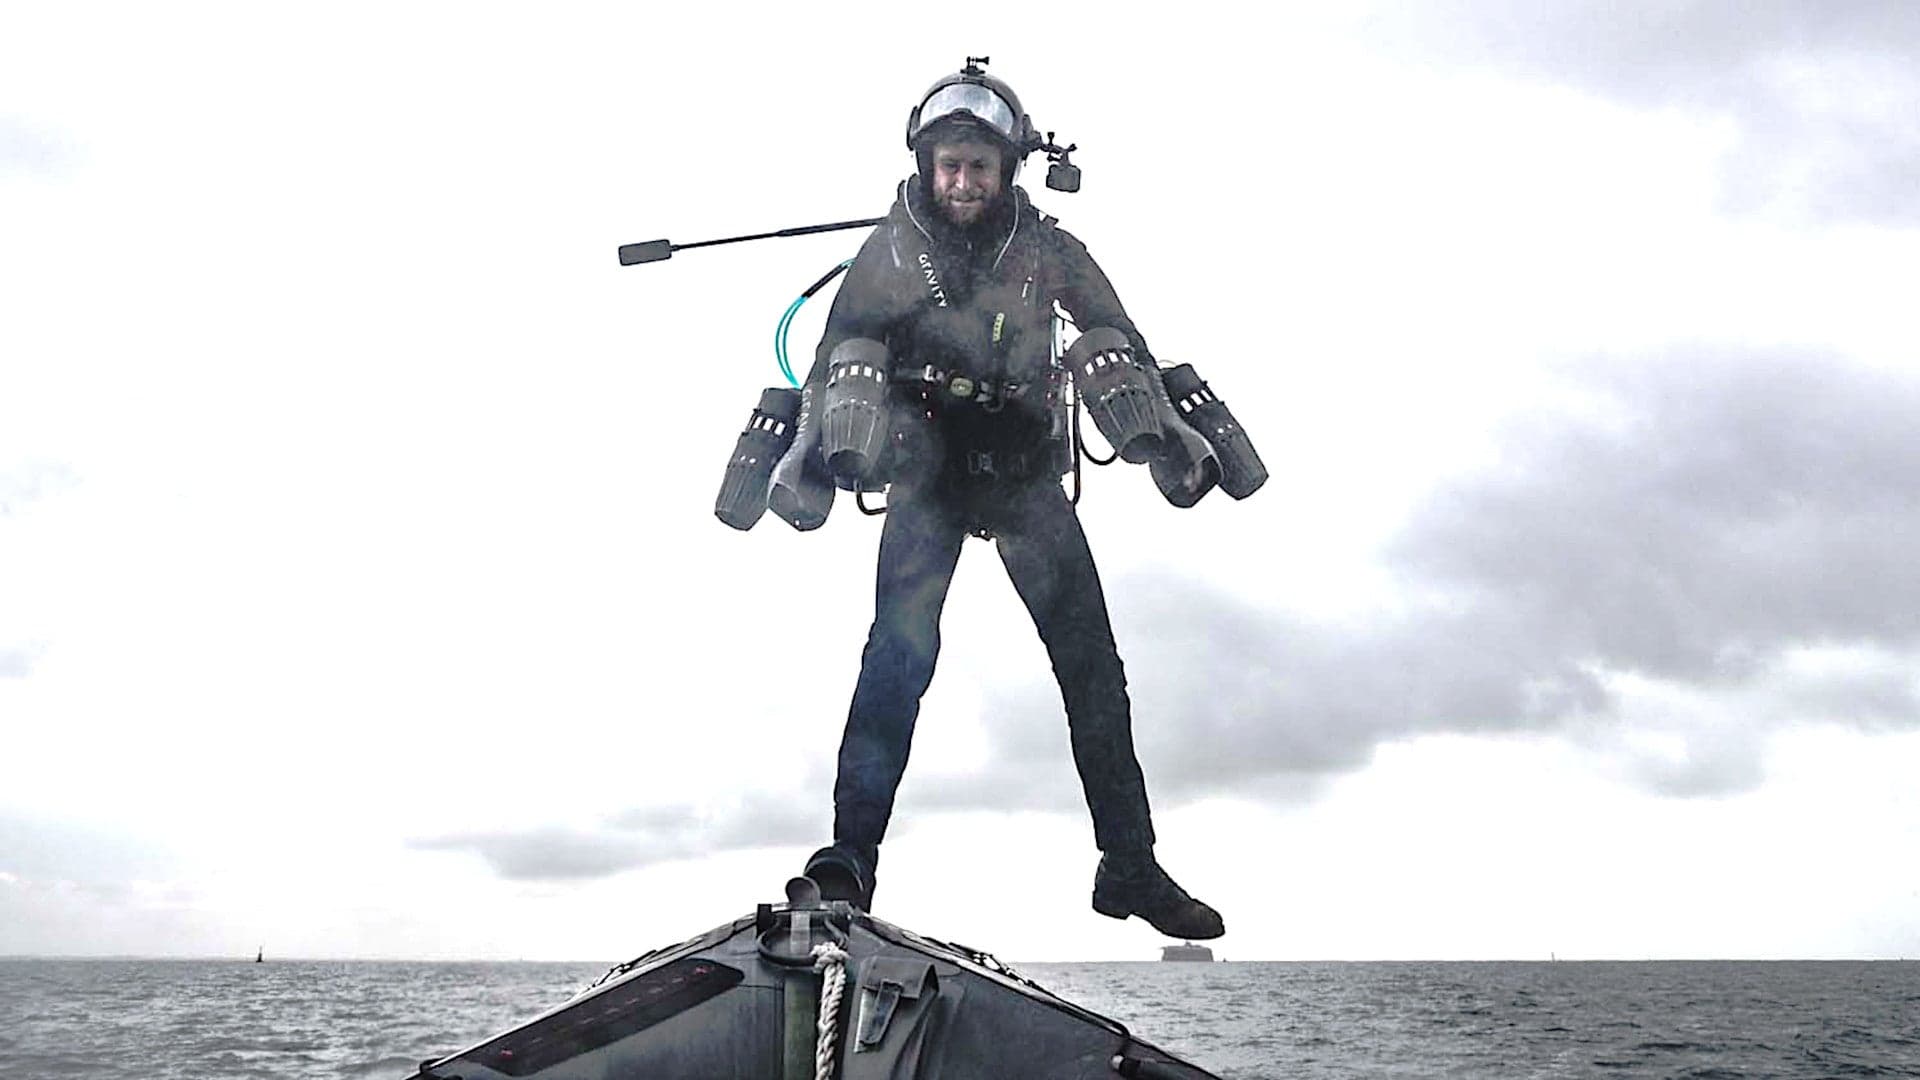 Jetpack Inventor Goes Zipping Between Royal Navy Boats In Open Water Tests